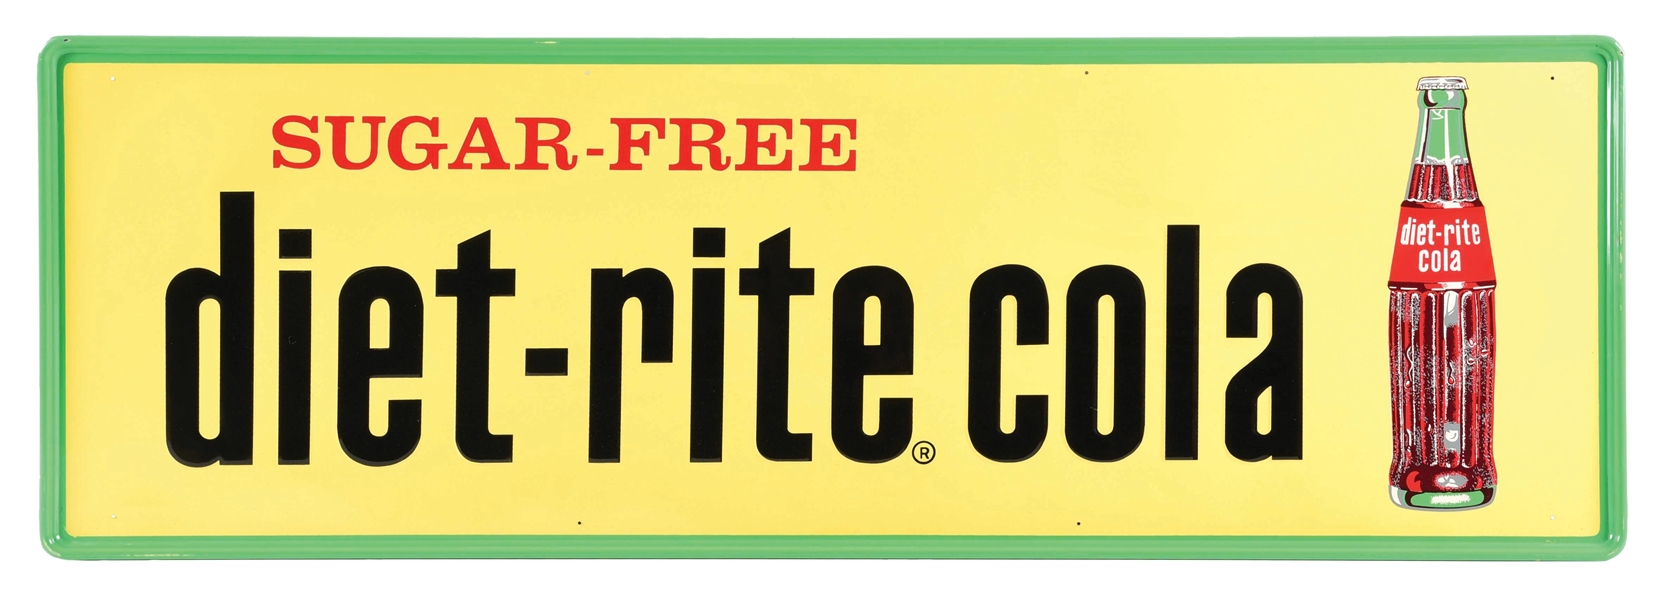 SUGAR FREE DIET-RITE COLA EMBOSSED TIN SIGN W/ BOTTLE GRAPHIC. 